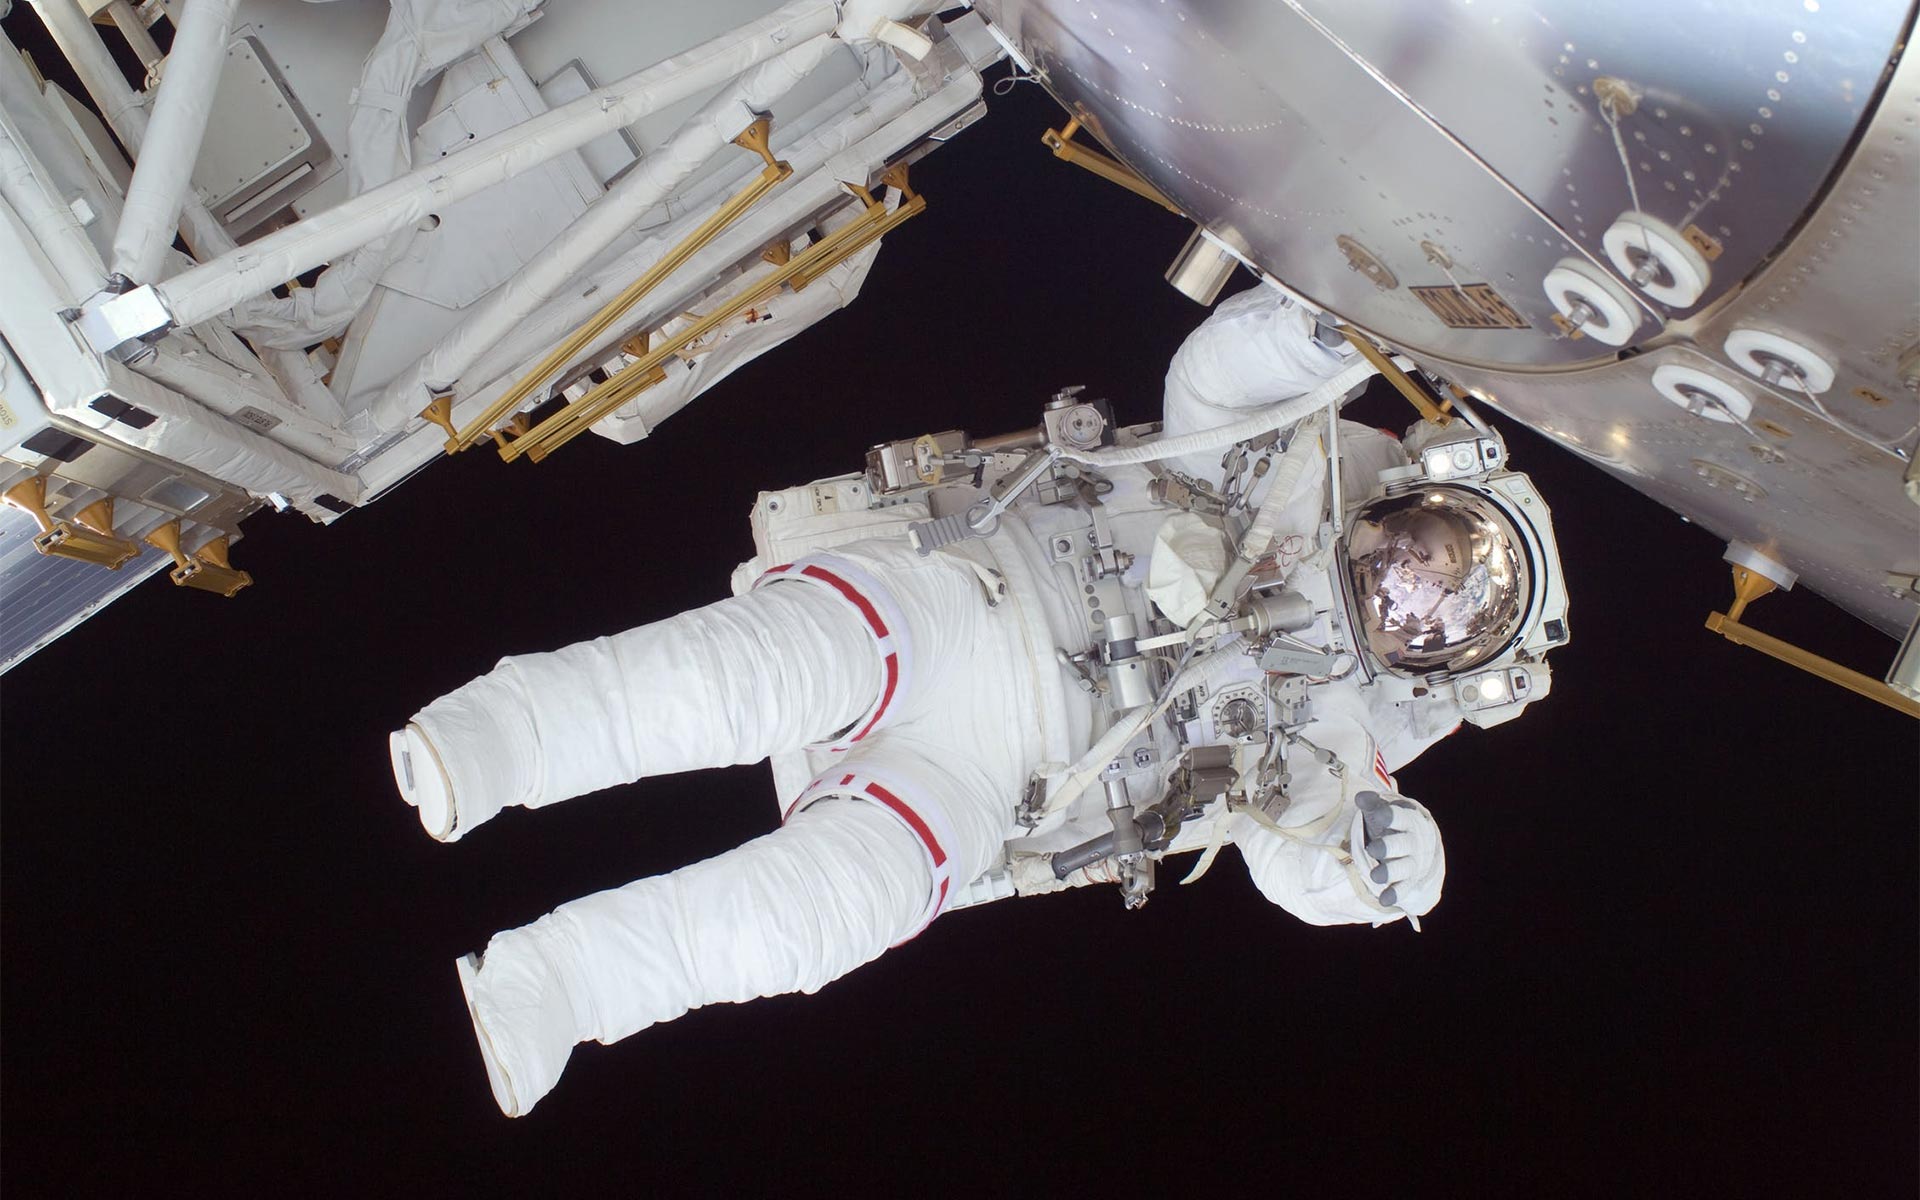 Astronaut carrying out a spacewalk